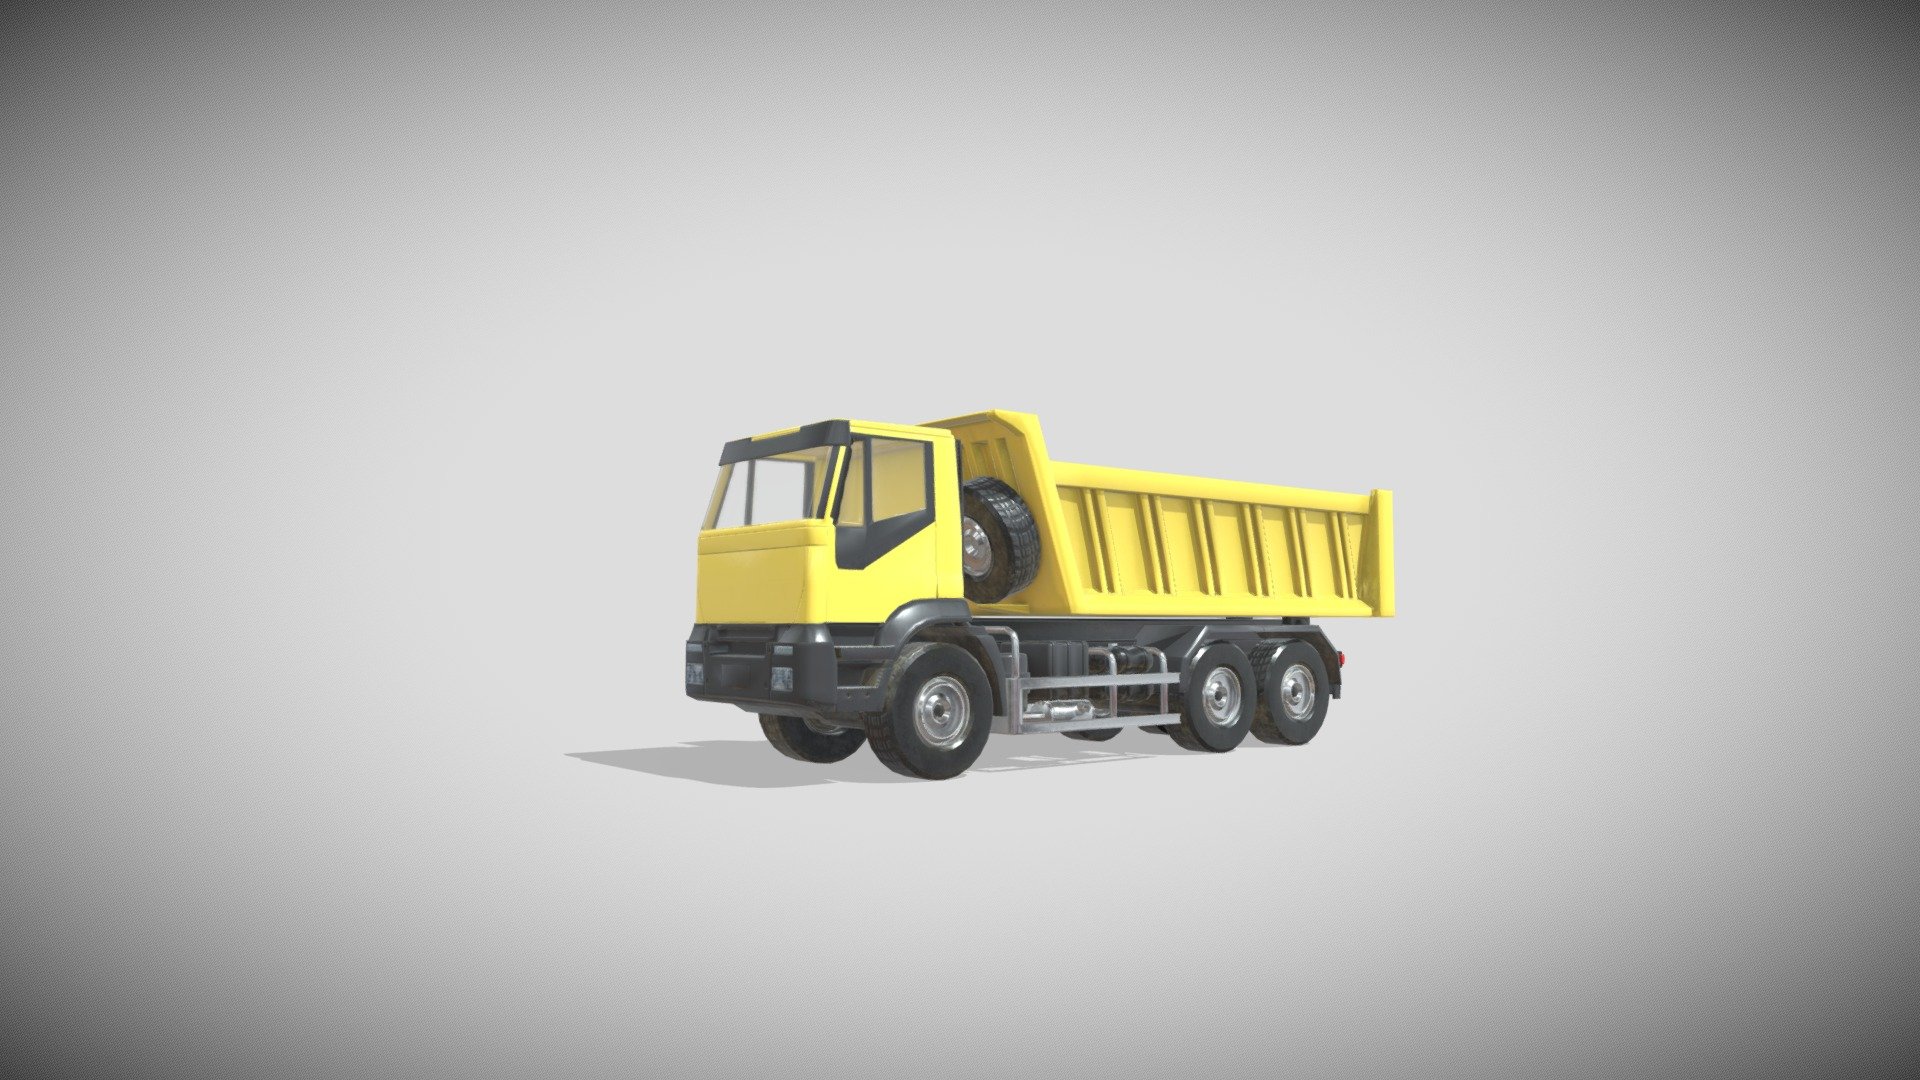 3D model with 4 animations :
-Forward
-Backward
-Up the dumpster
-Down the dumpster

Optimise texture 4096 x 4096 one UV map. 
Low poly baked  high poly on substance Painter 3d model